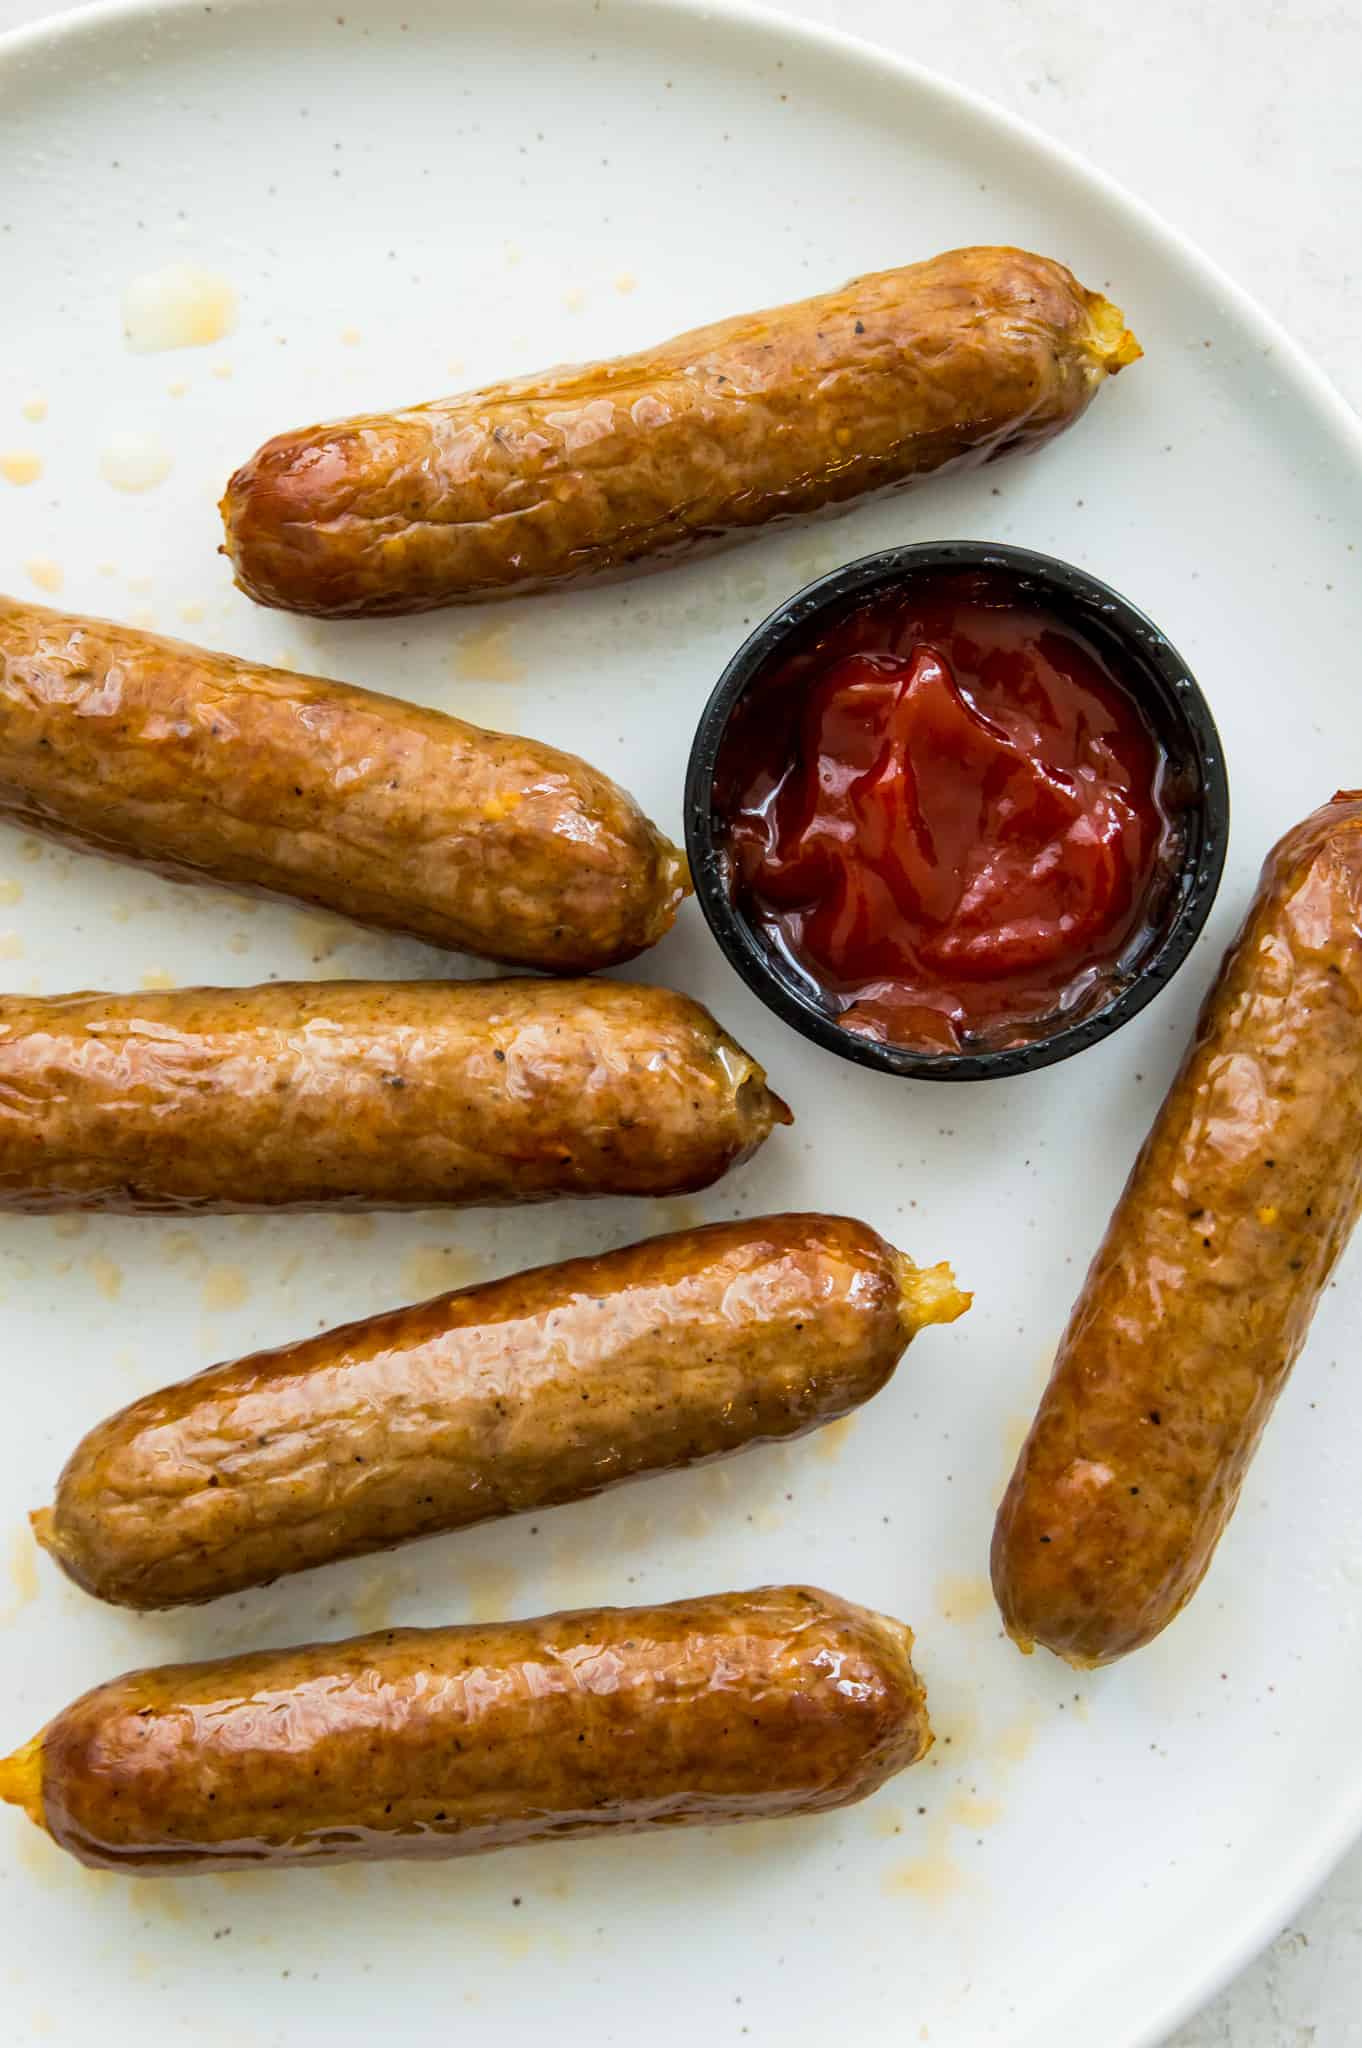 A plate with cooked brats with a dish full of ketchup beside them.